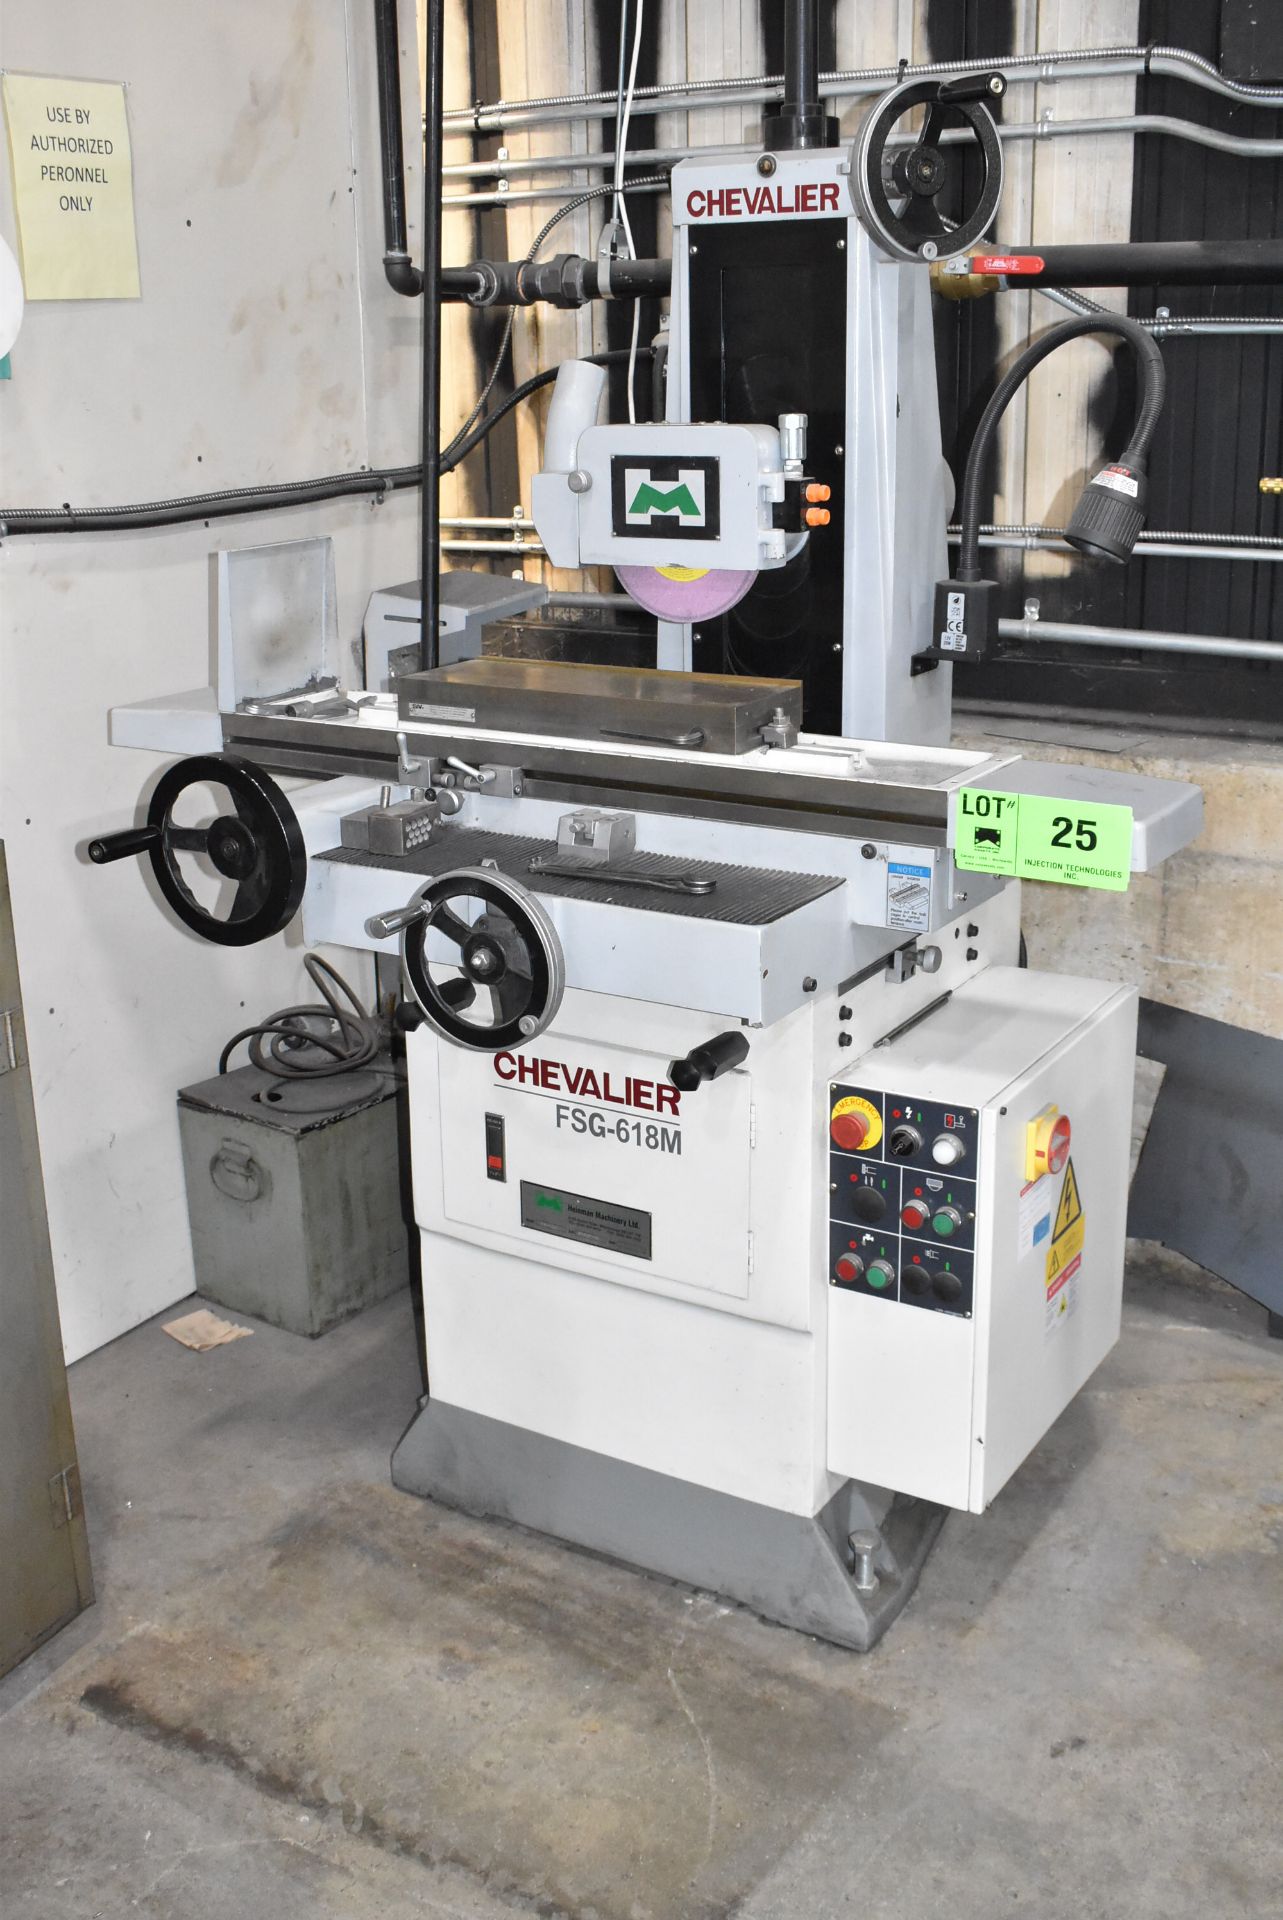 CHEVALIER FSG-618M SURFACE GRINDER WITH 6" X 18" MAGNETIC CHUCK, 8" WHEEL, INCREMENTAL DOWN FEED, - Image 2 of 7